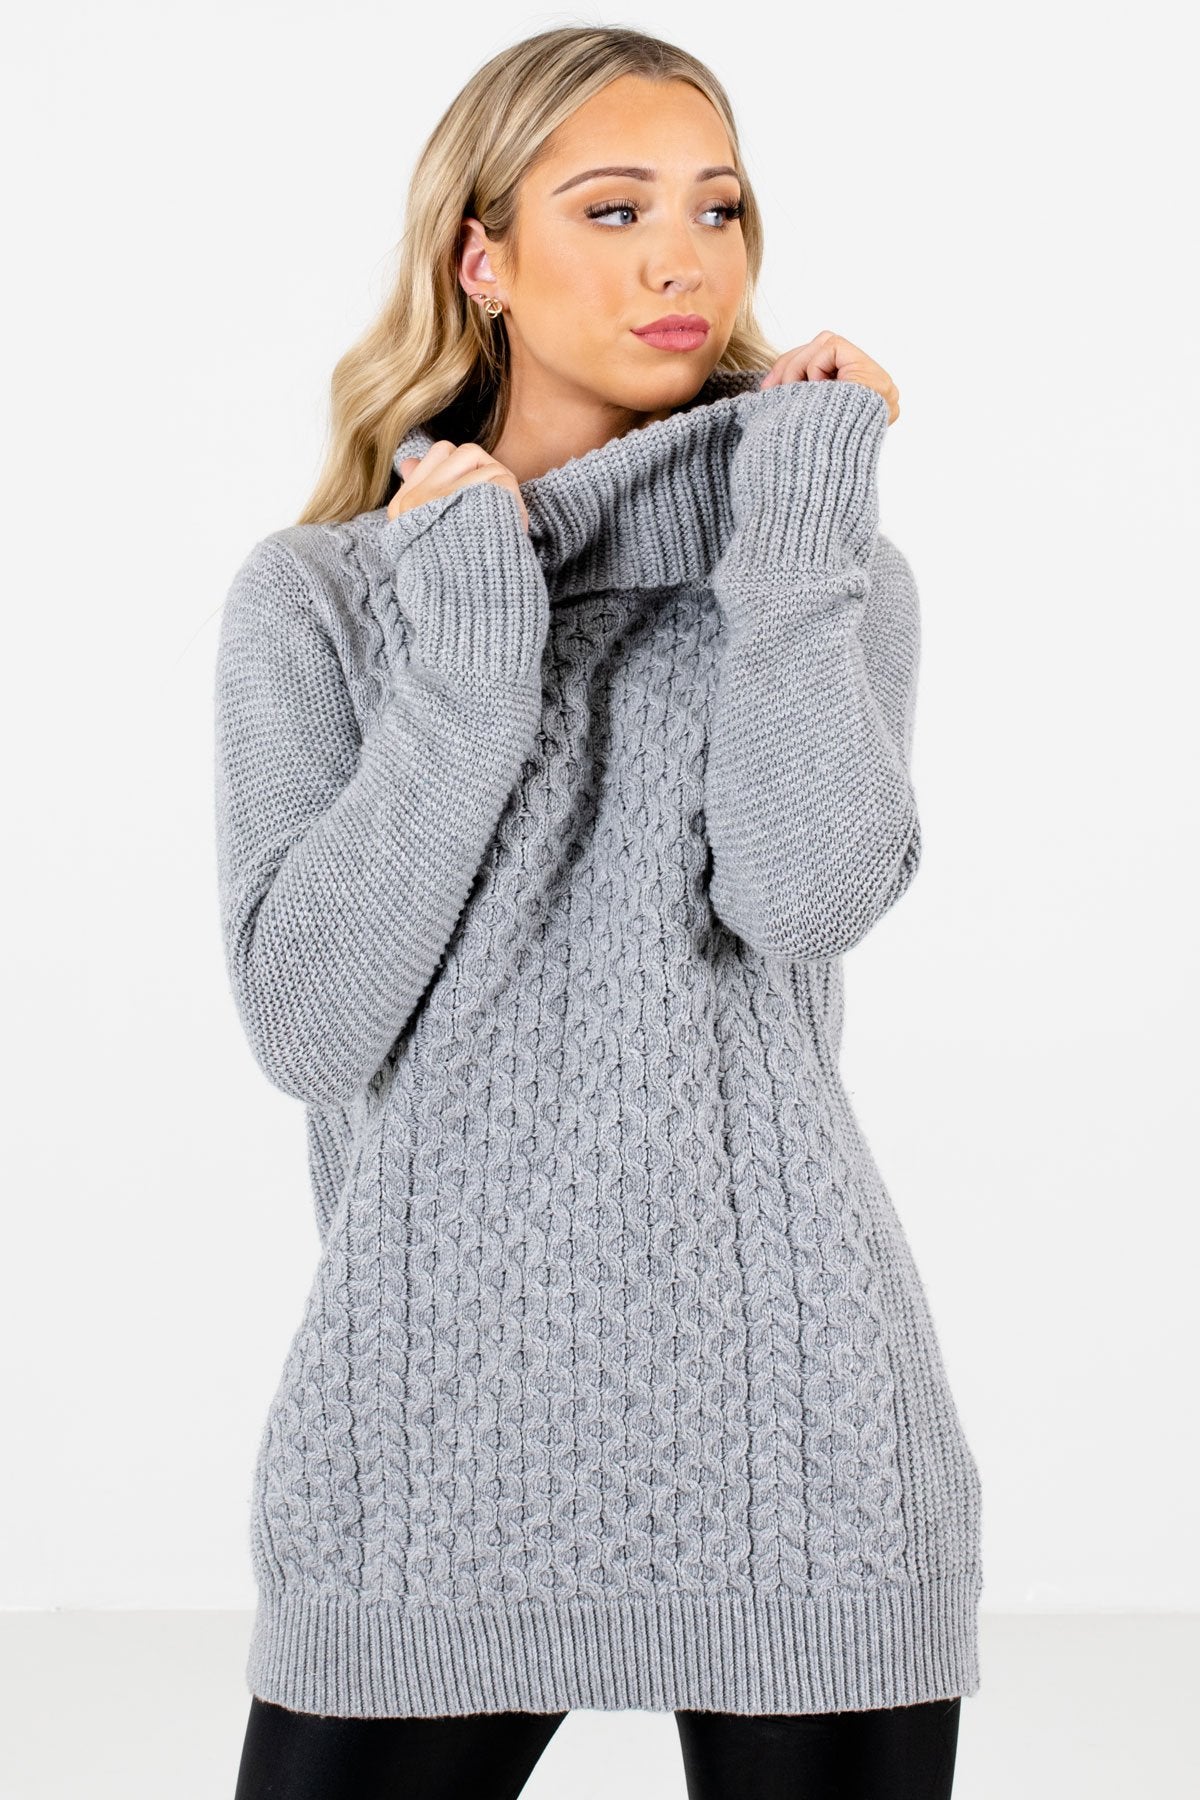 Women's Gray Cable Knit Patterned Boutique Sweater